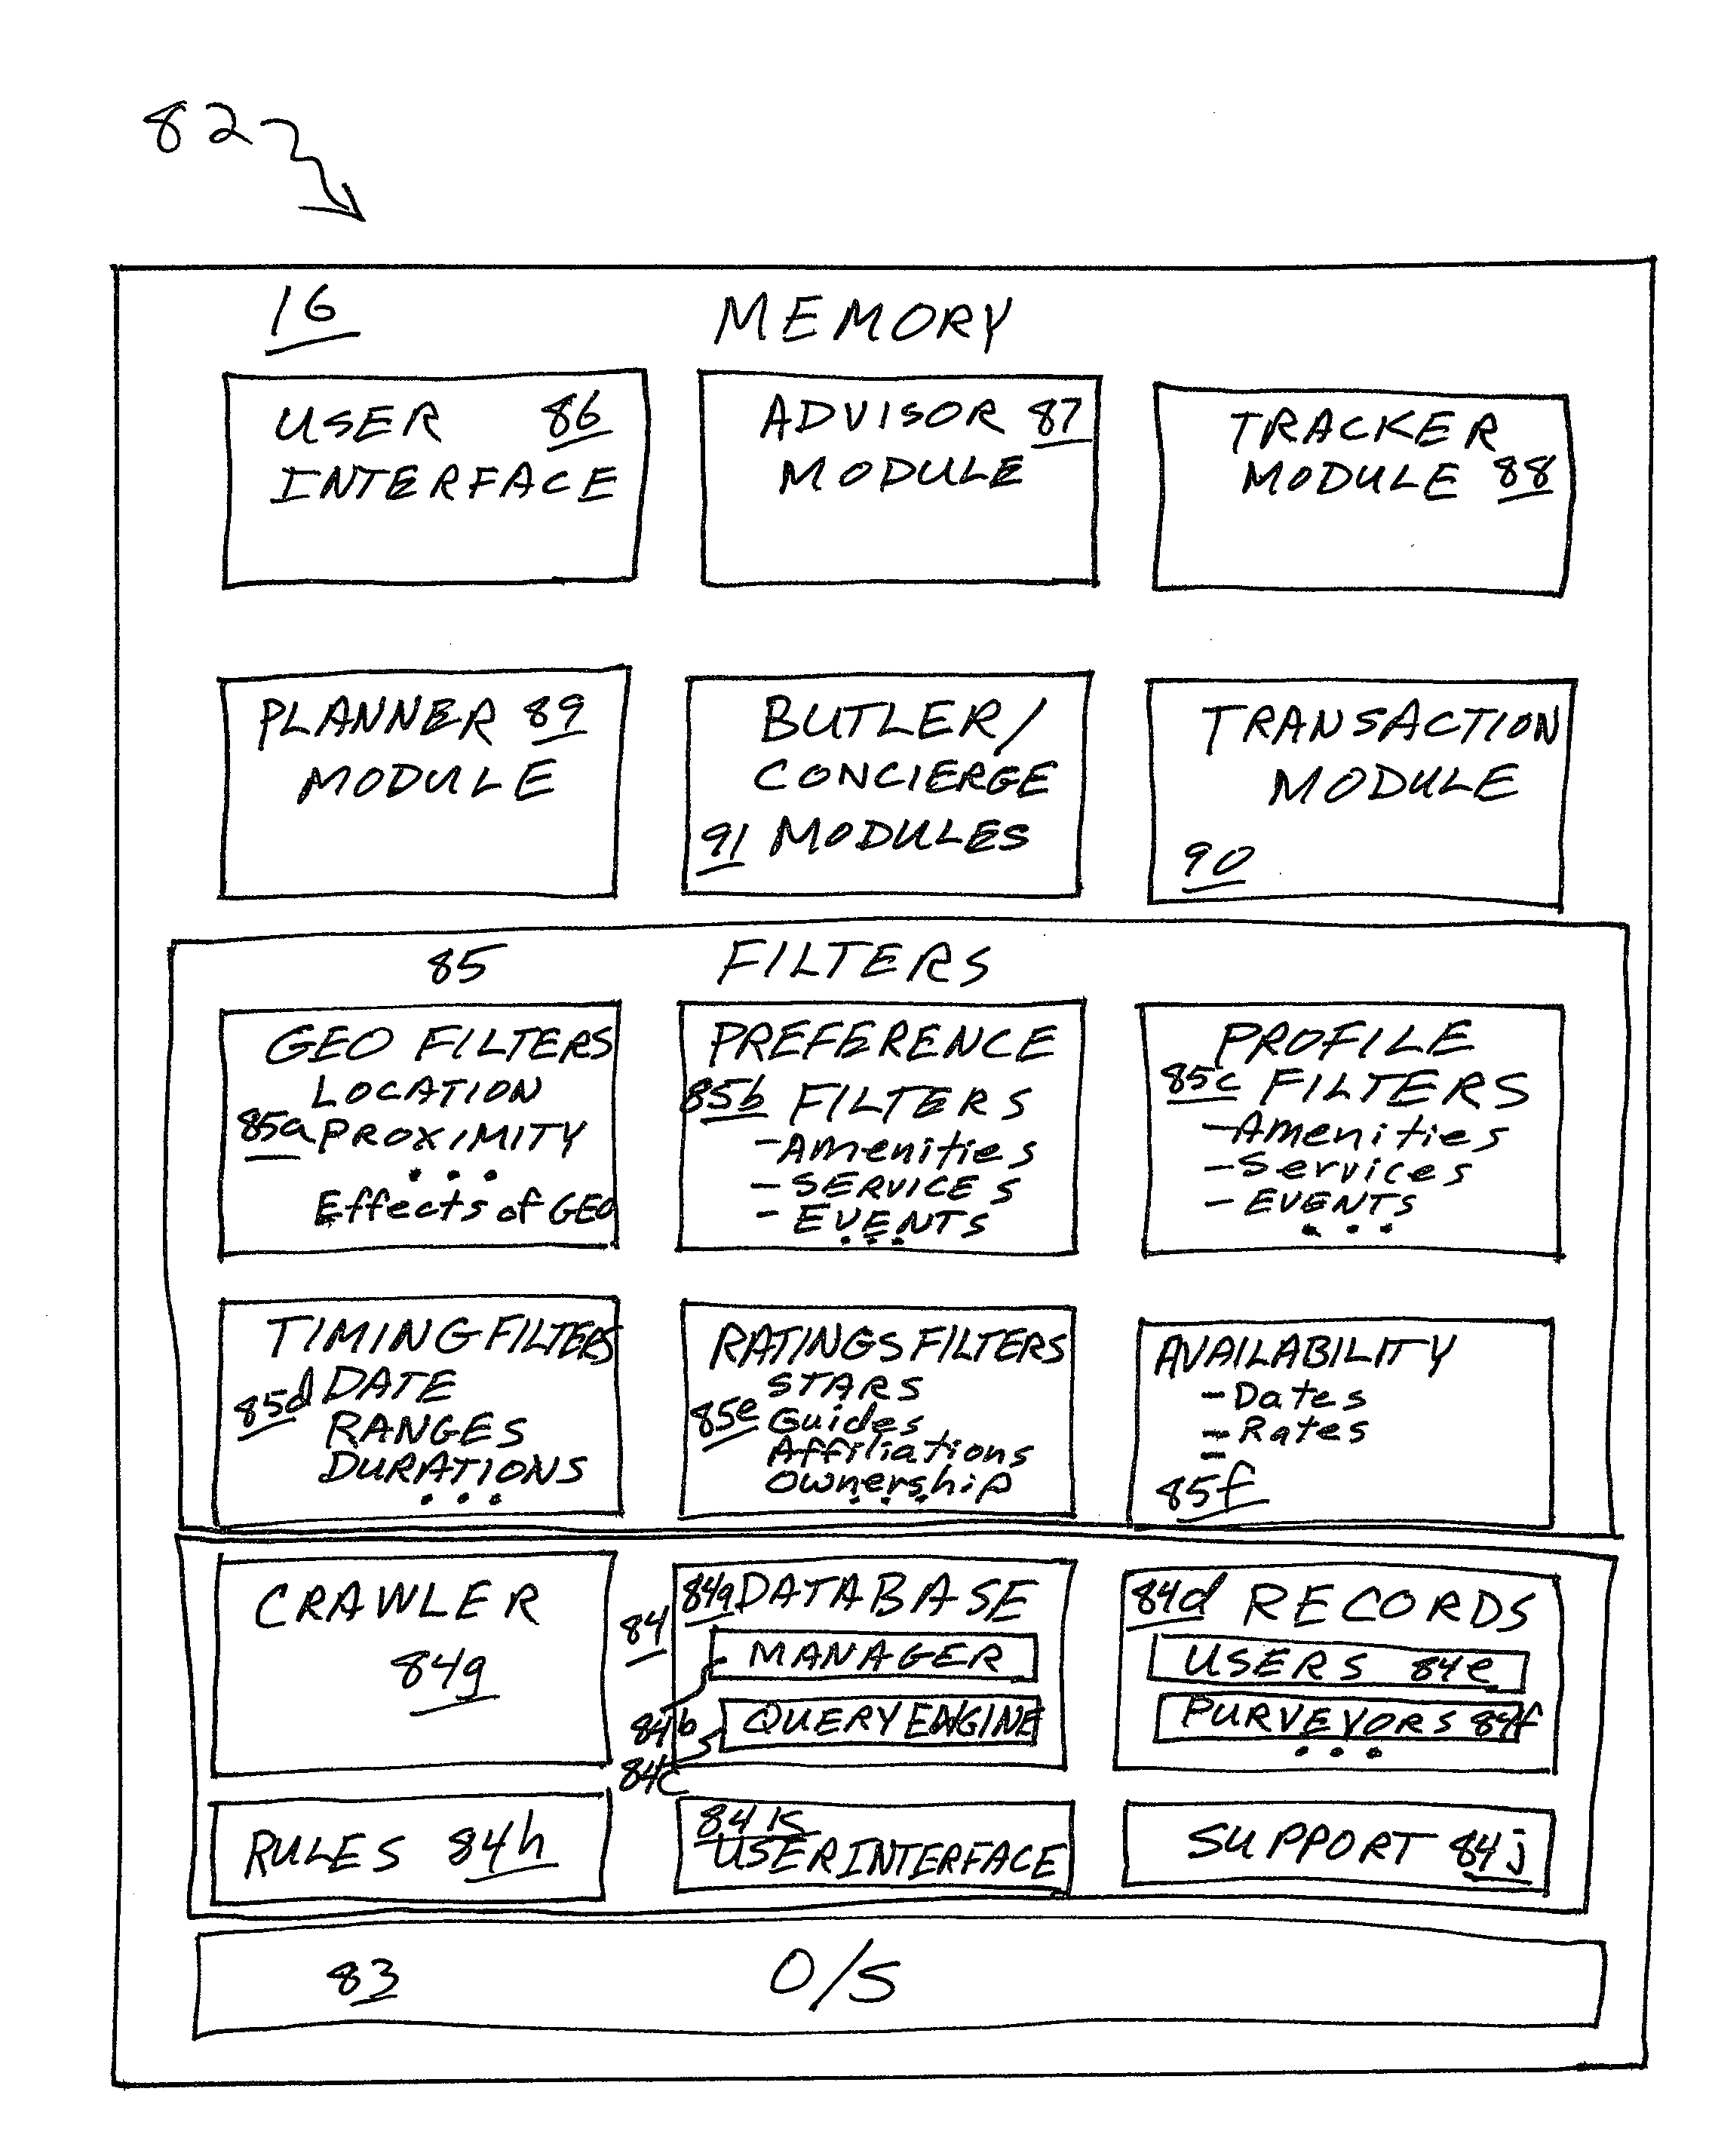 Last-room-available search apparatus and method